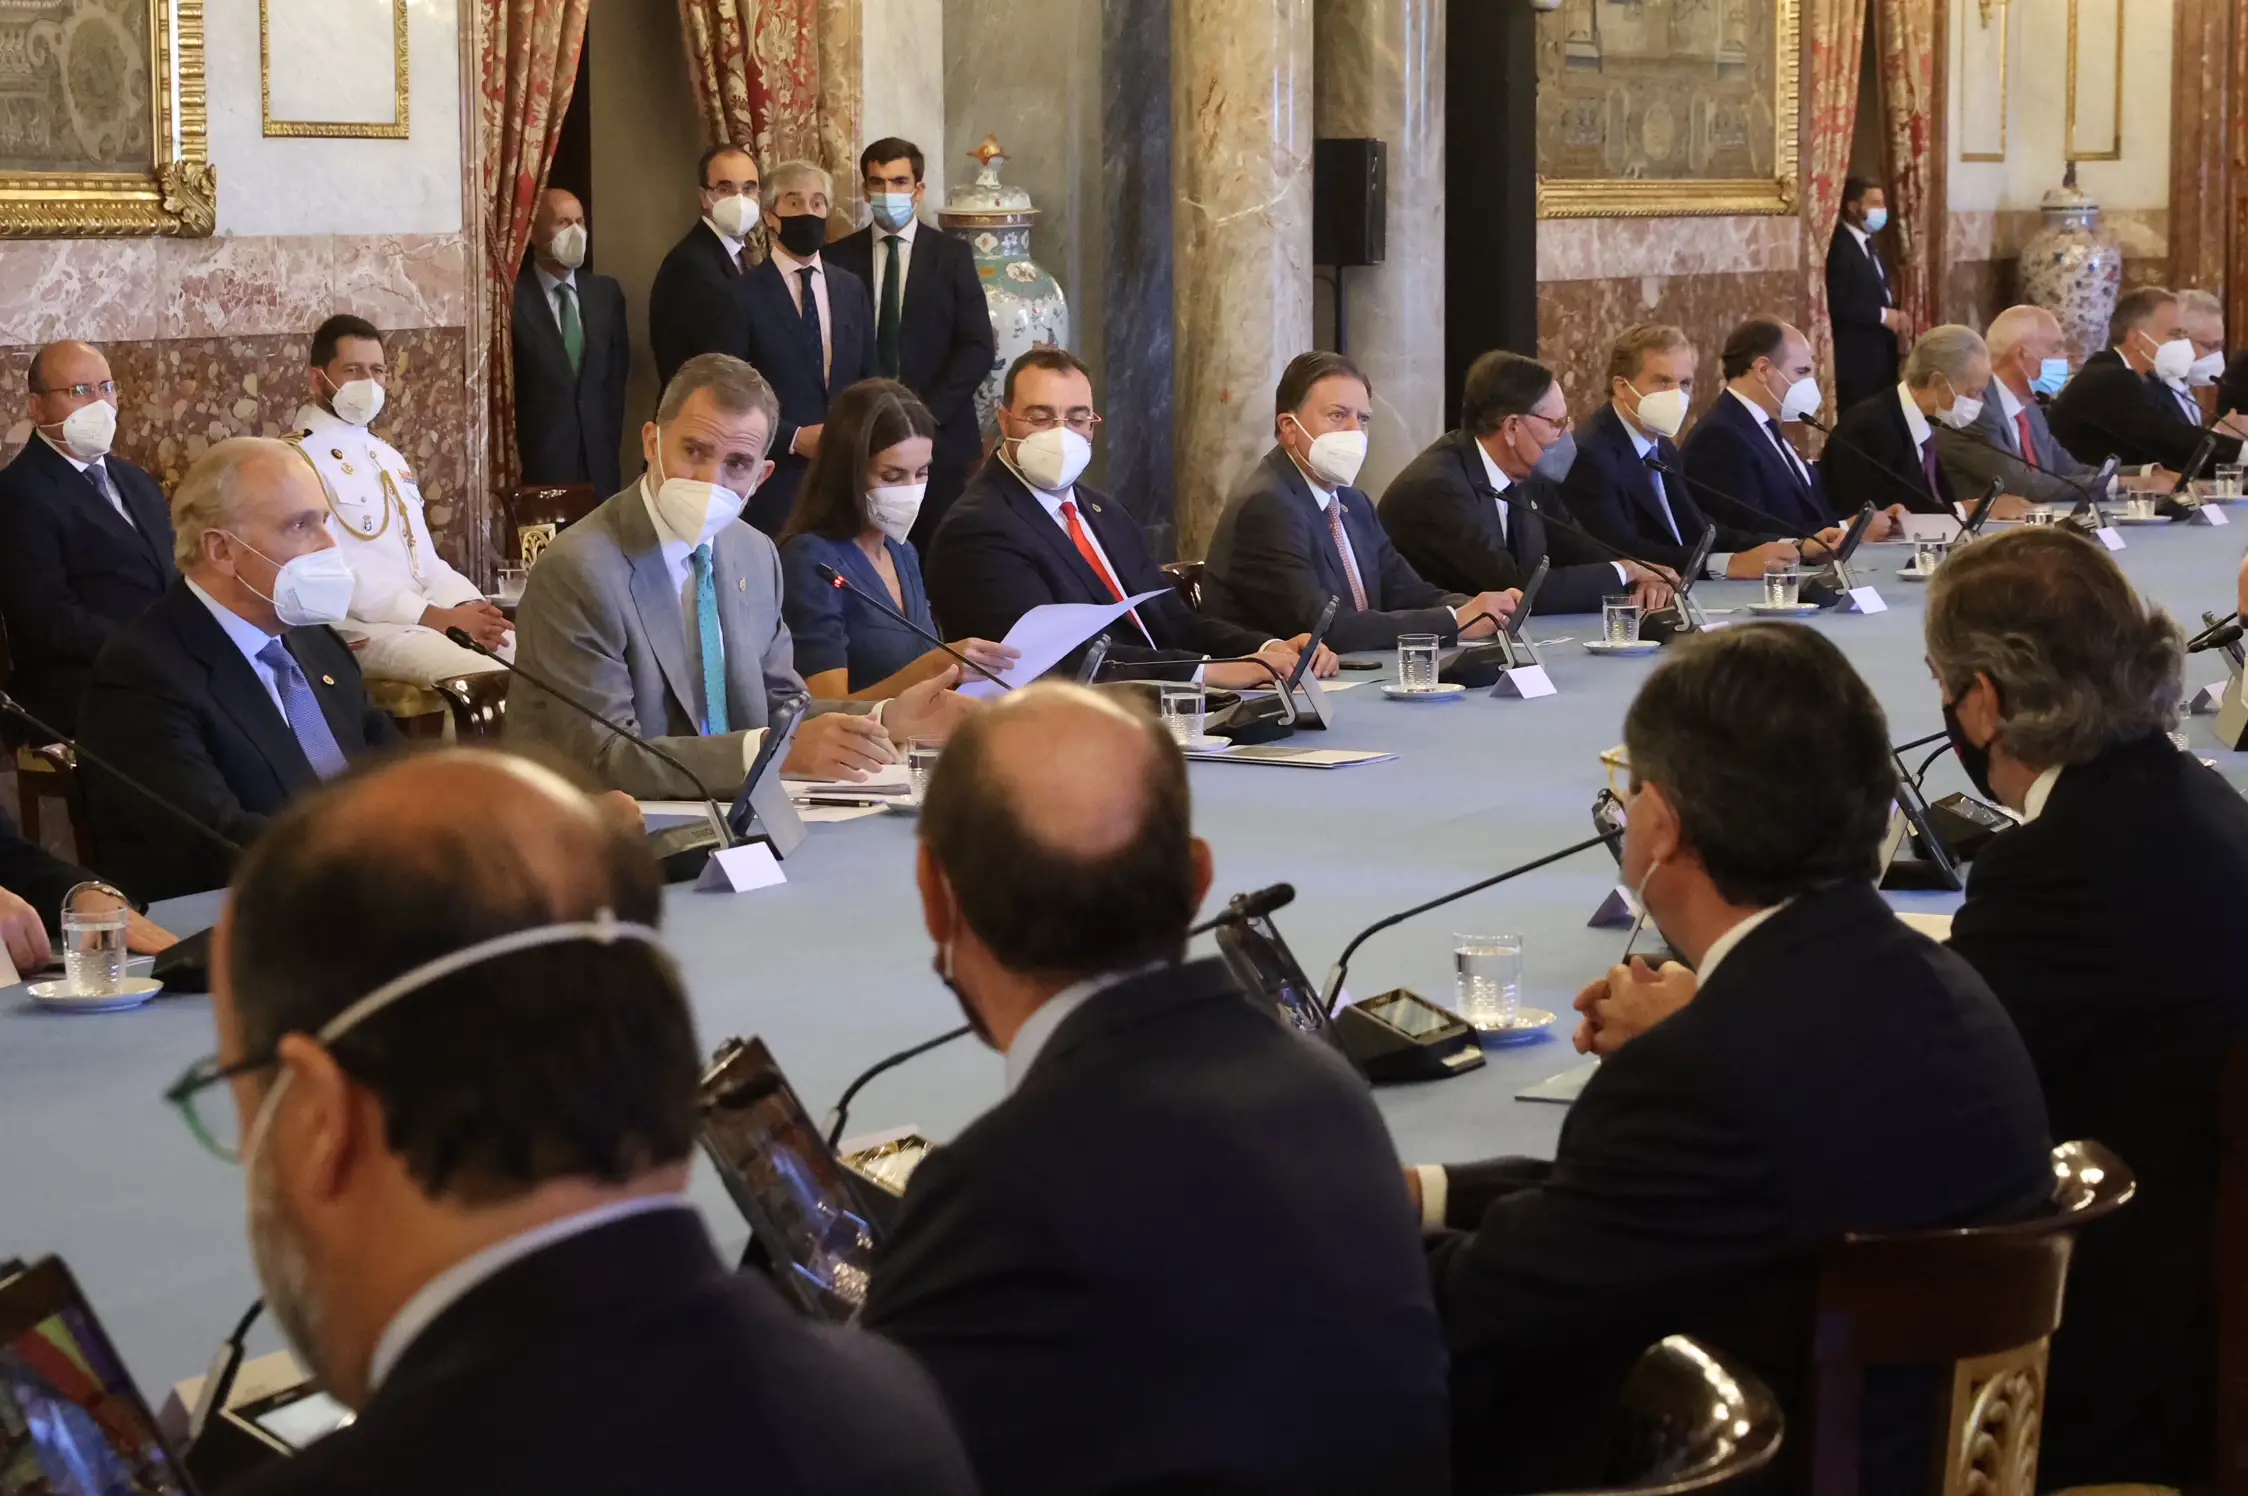 King Felipe and Queen Letizia of Spain at Princess of Asturias Foundation Meeting at The Royal Palace